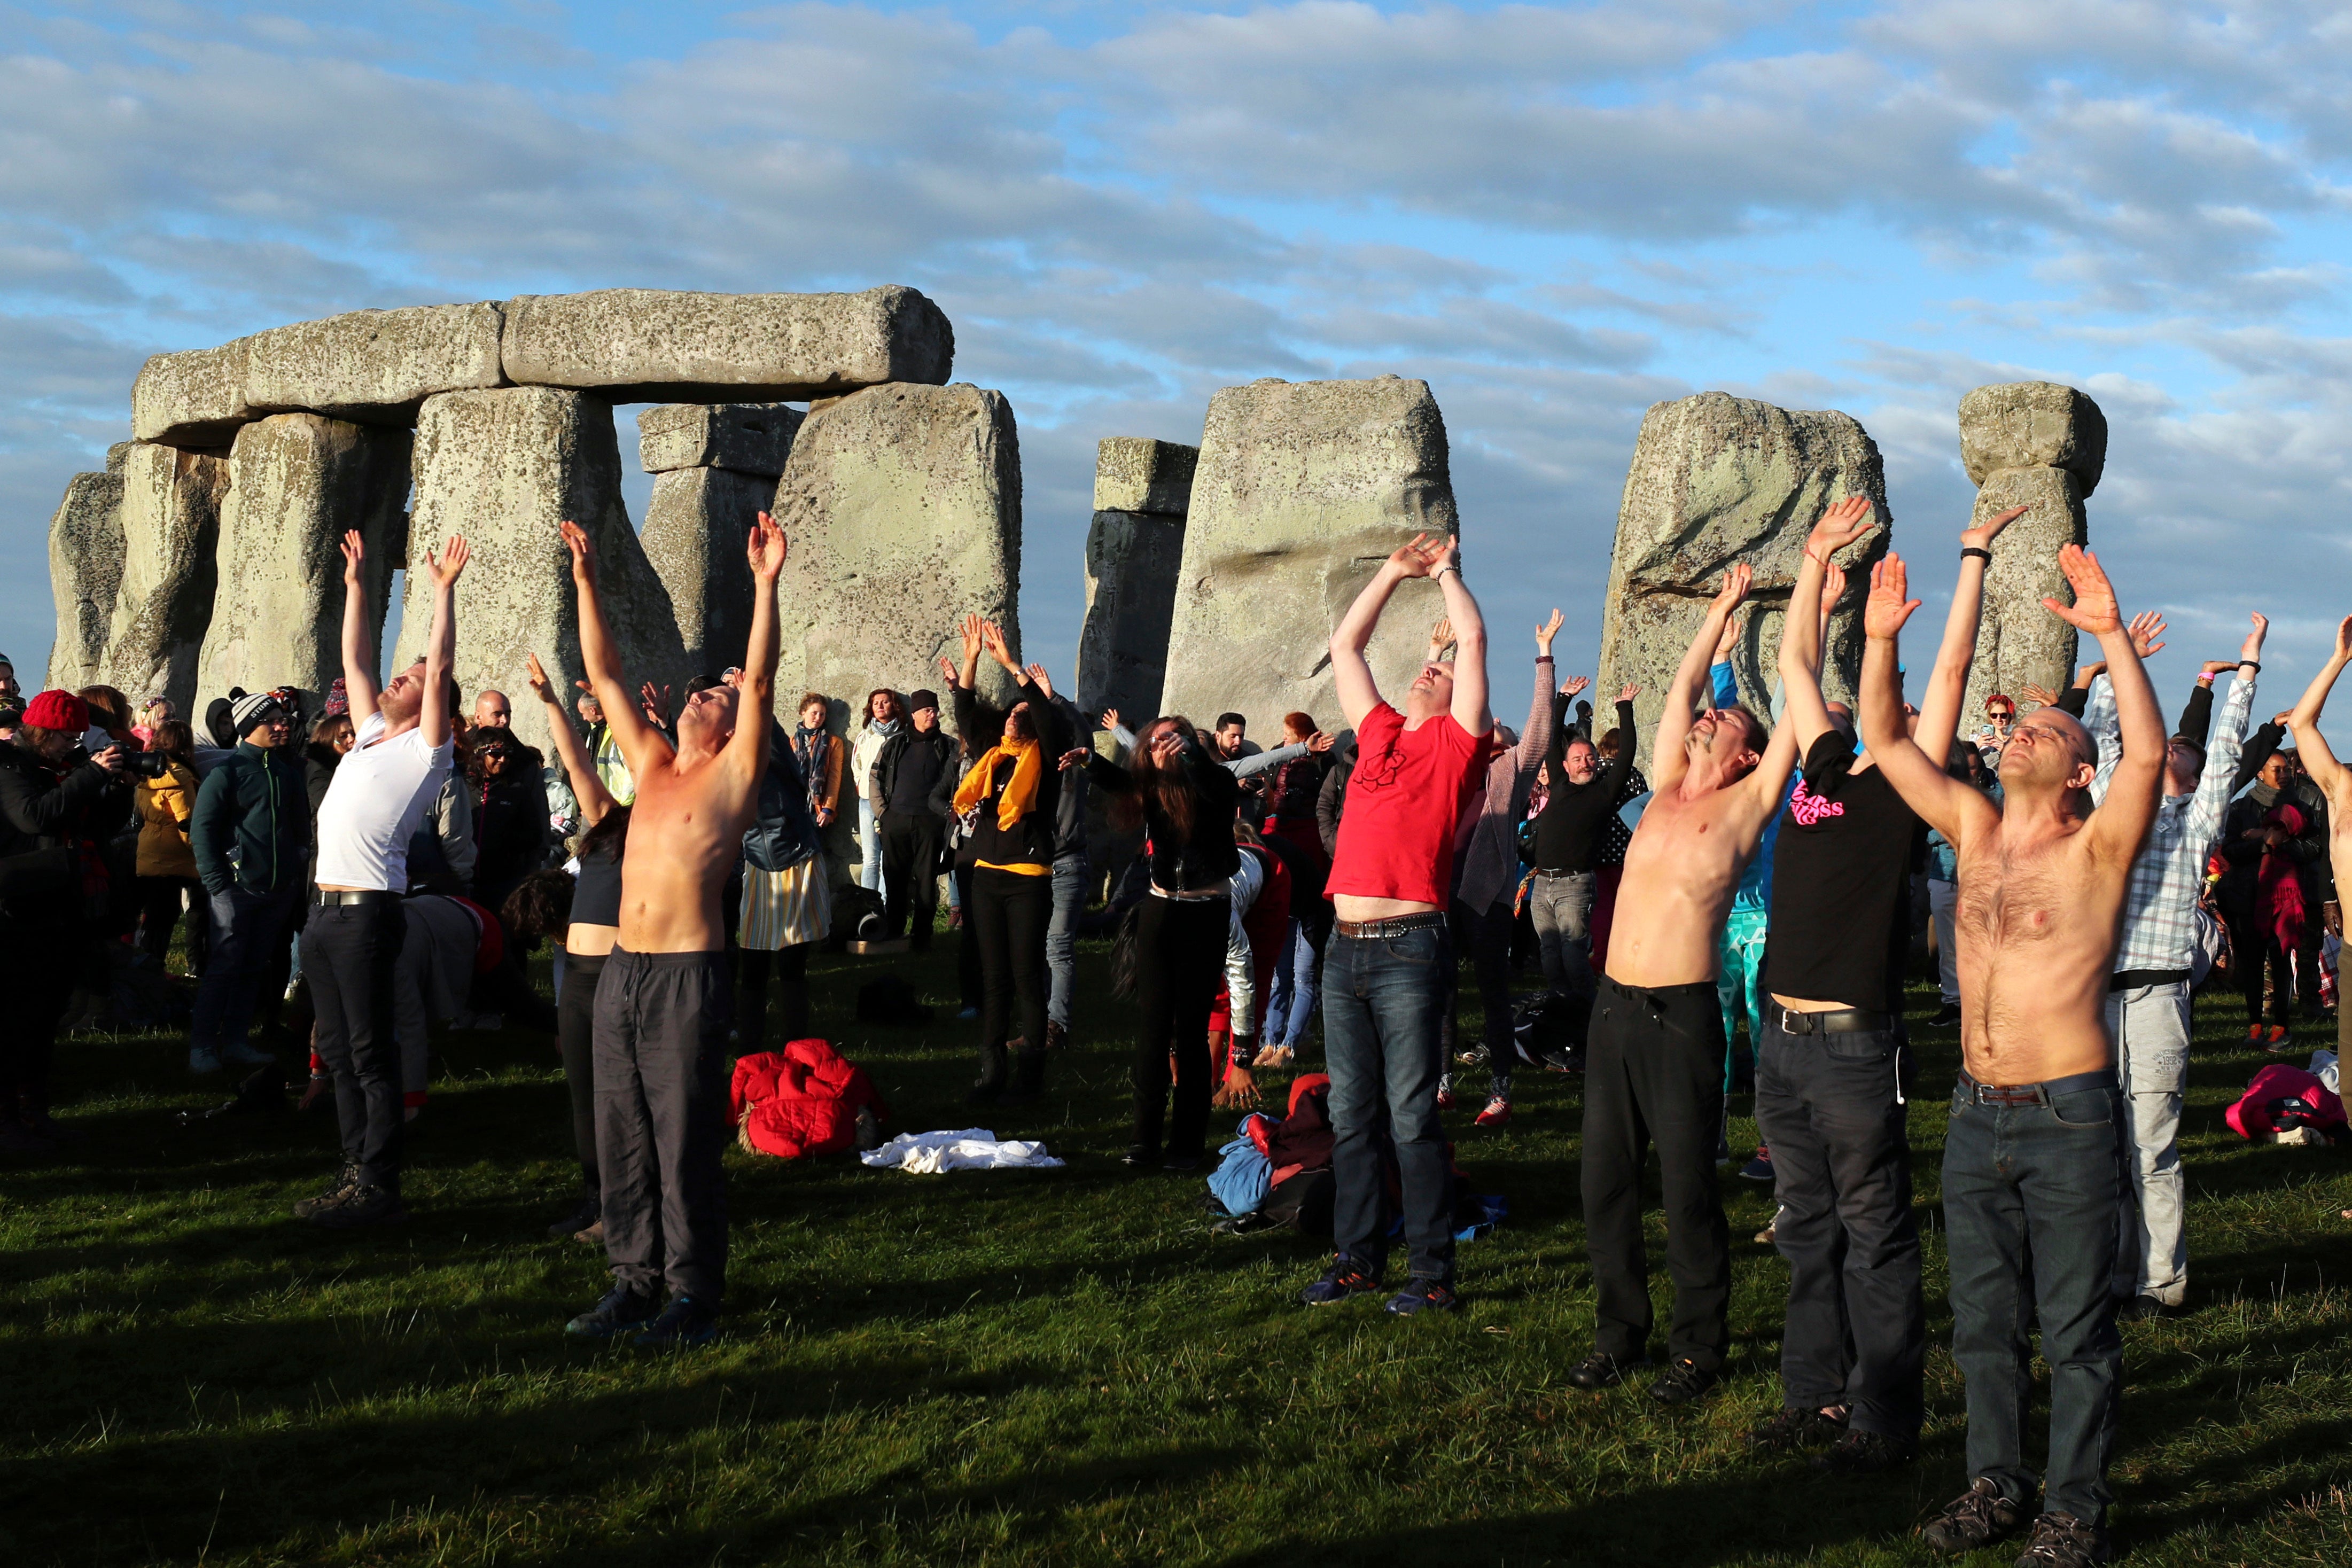 Thousands are expected to descend on Stonehenge for summer solstice